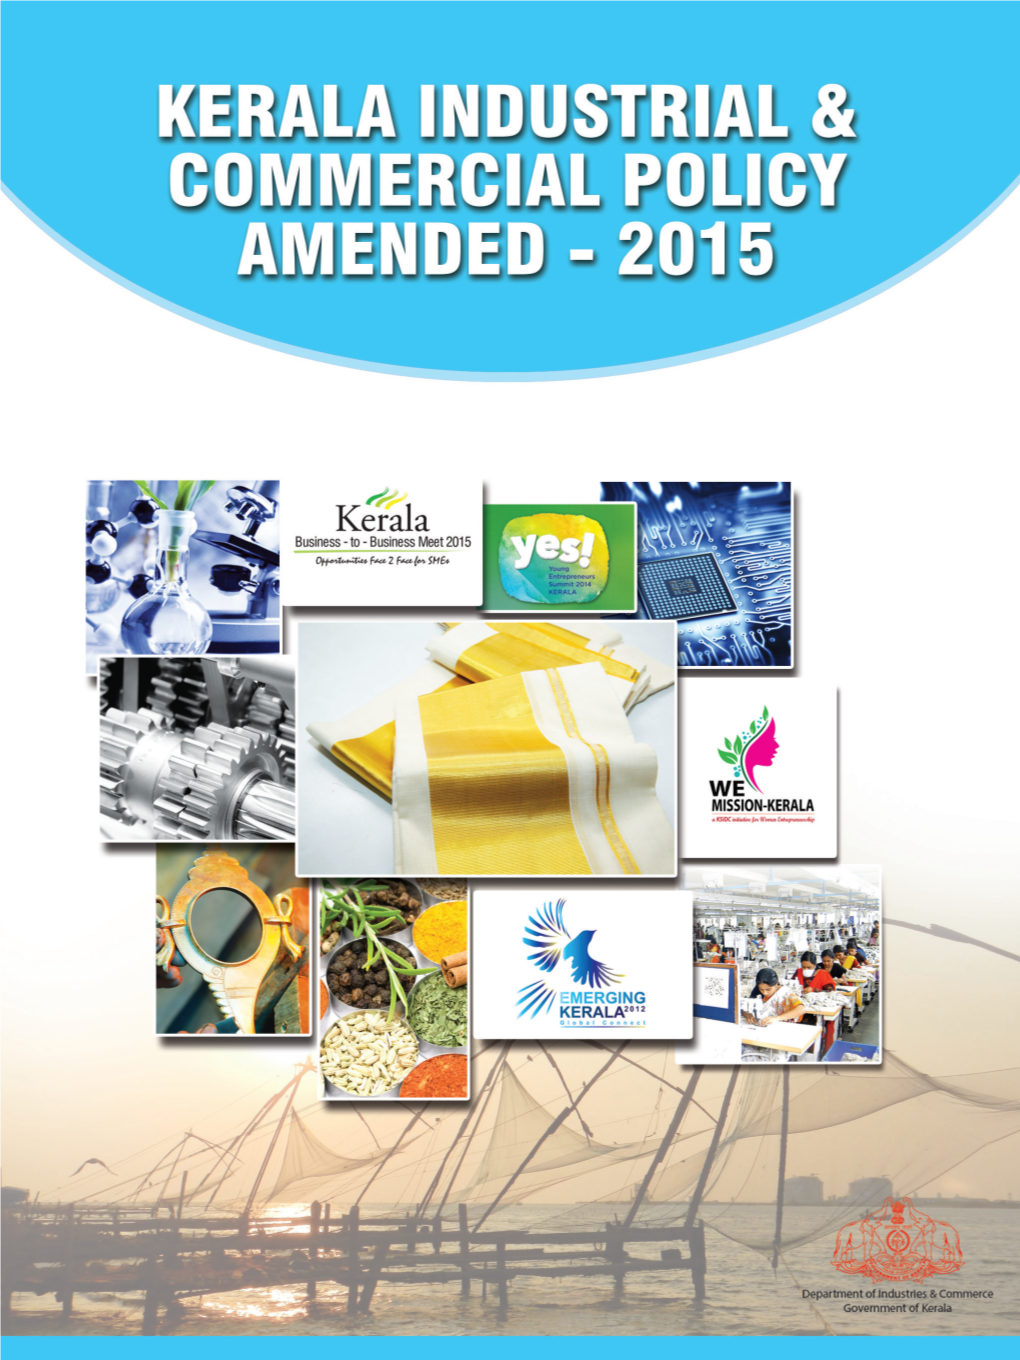 Kerala Industrial & Commercial Policy Amended-2015